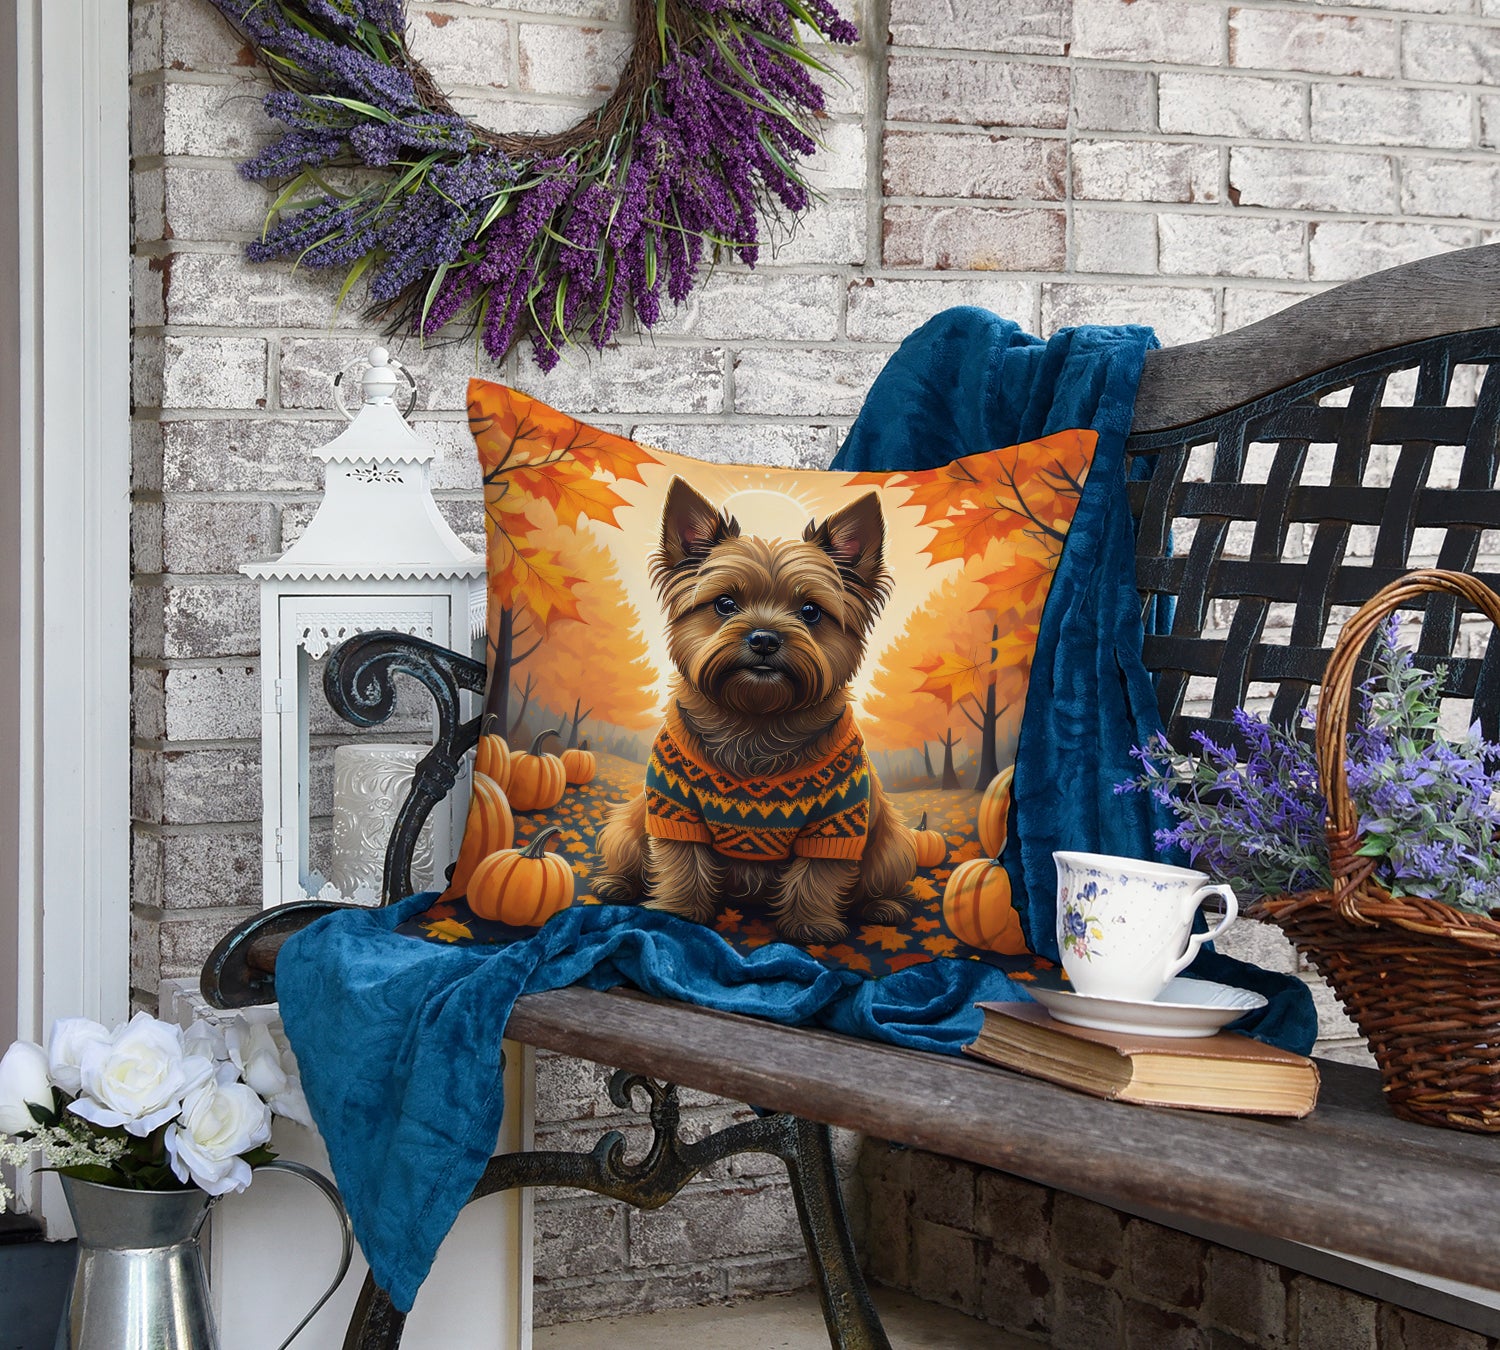 Buy this Cairn Terrier Fall Fabric Decorative Pillow